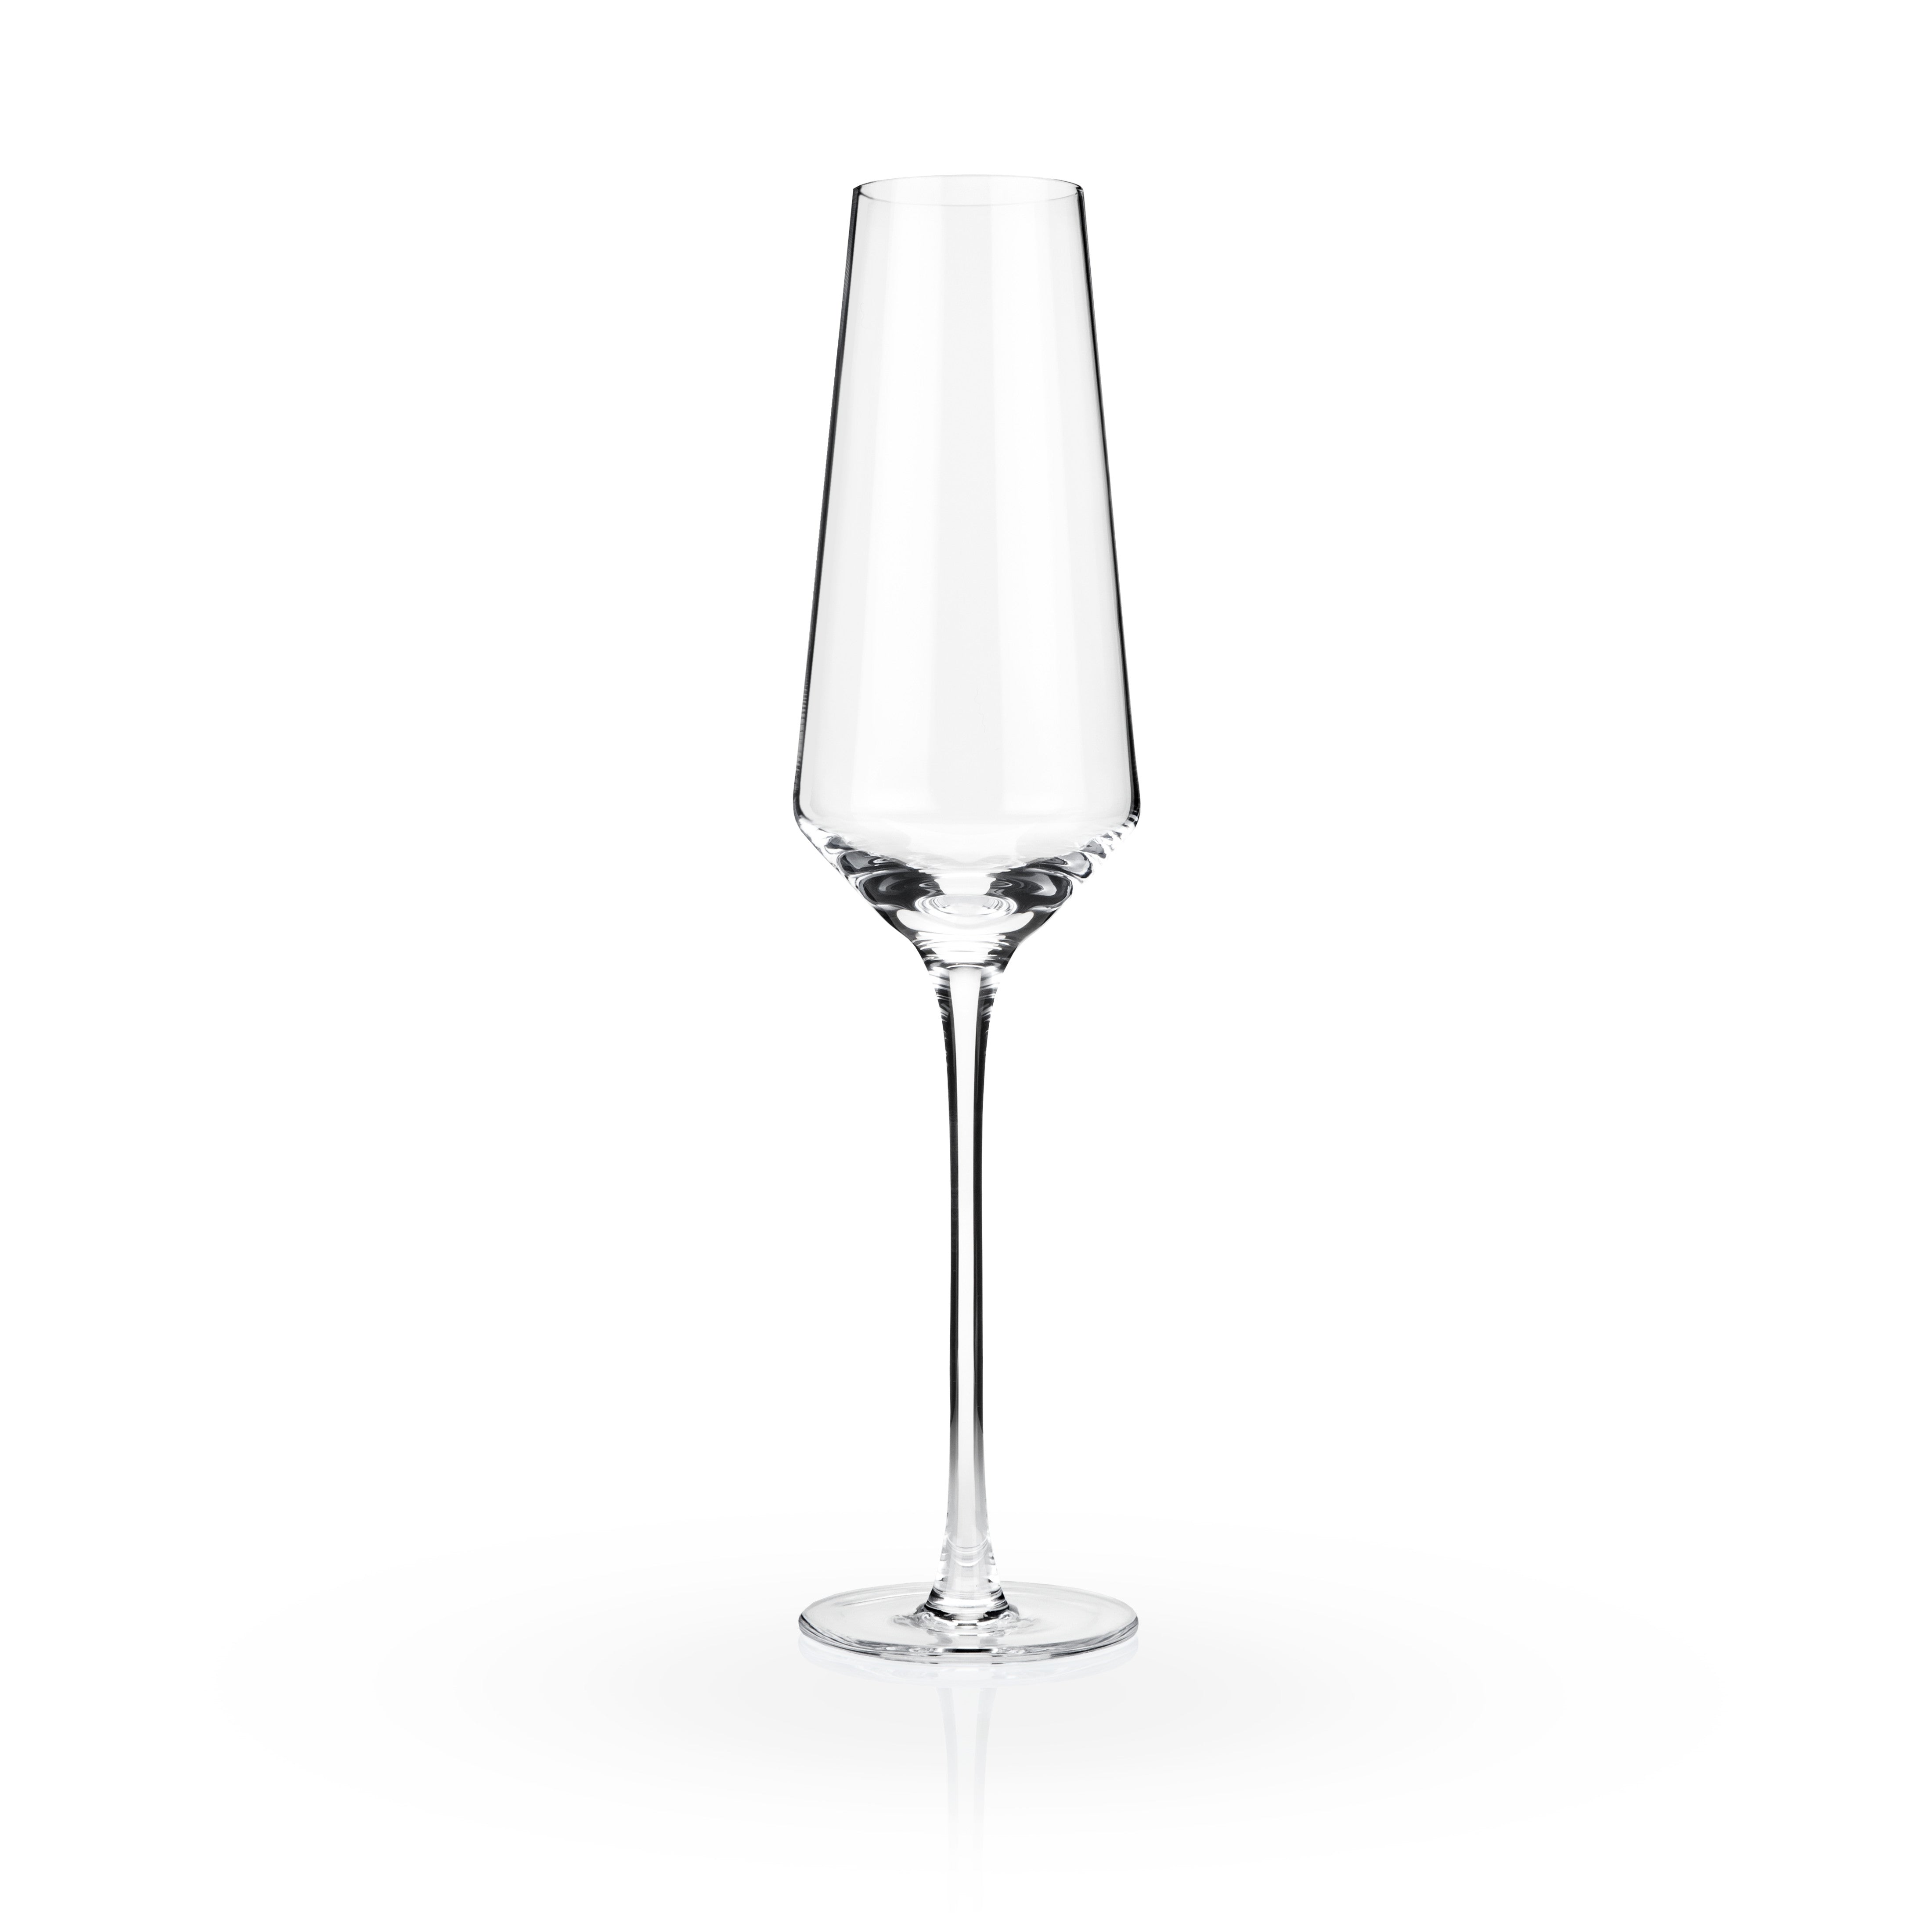 Family Crest Champagne Flutes (Set of 2) – Healy Glass Artistry